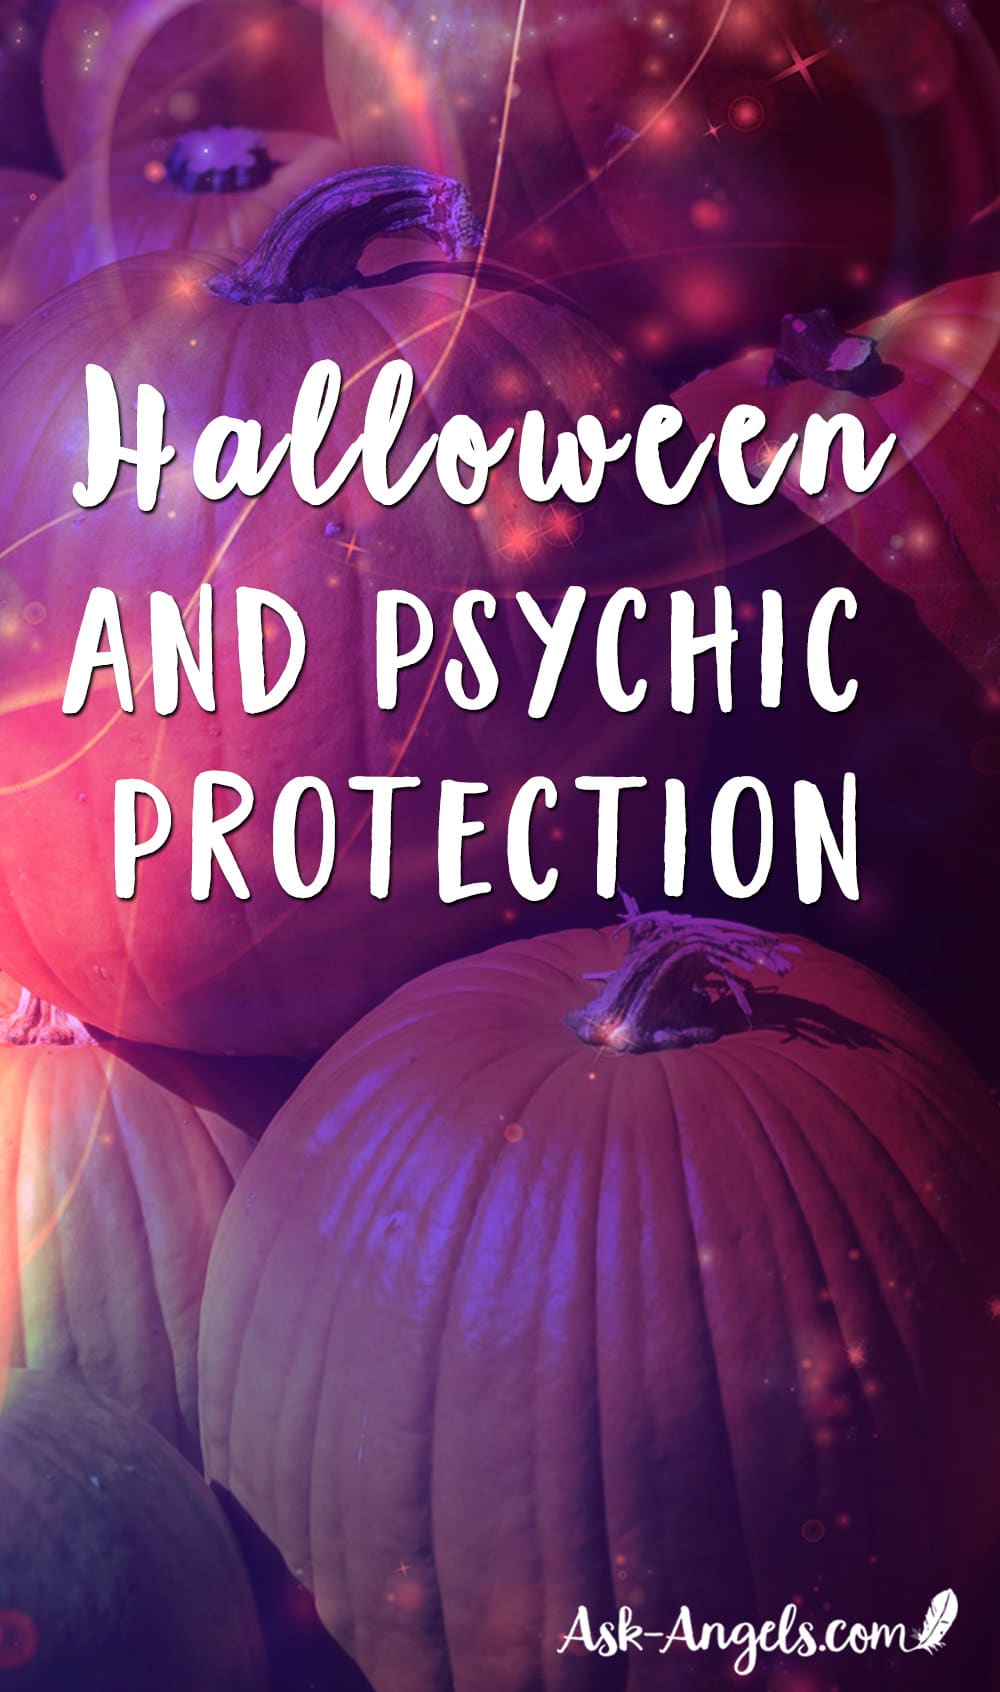 Halloween and Psychic Protection